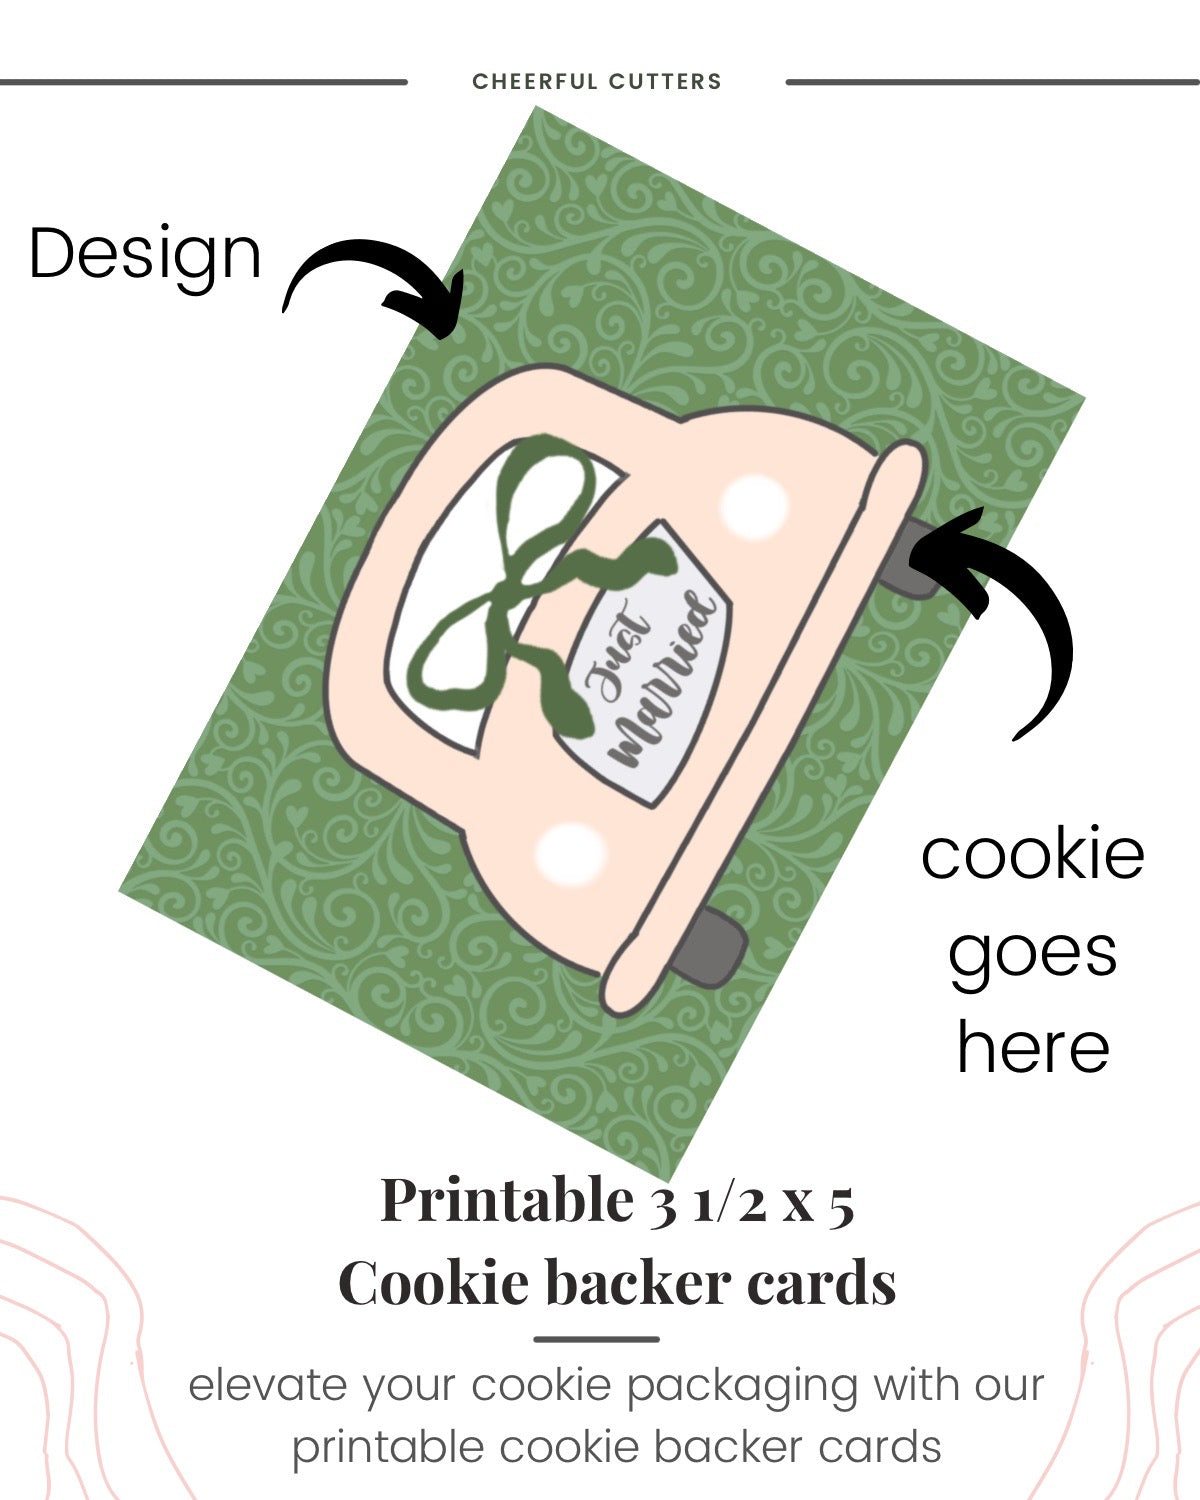 Green patterned cookie backer card for packaging  - file download